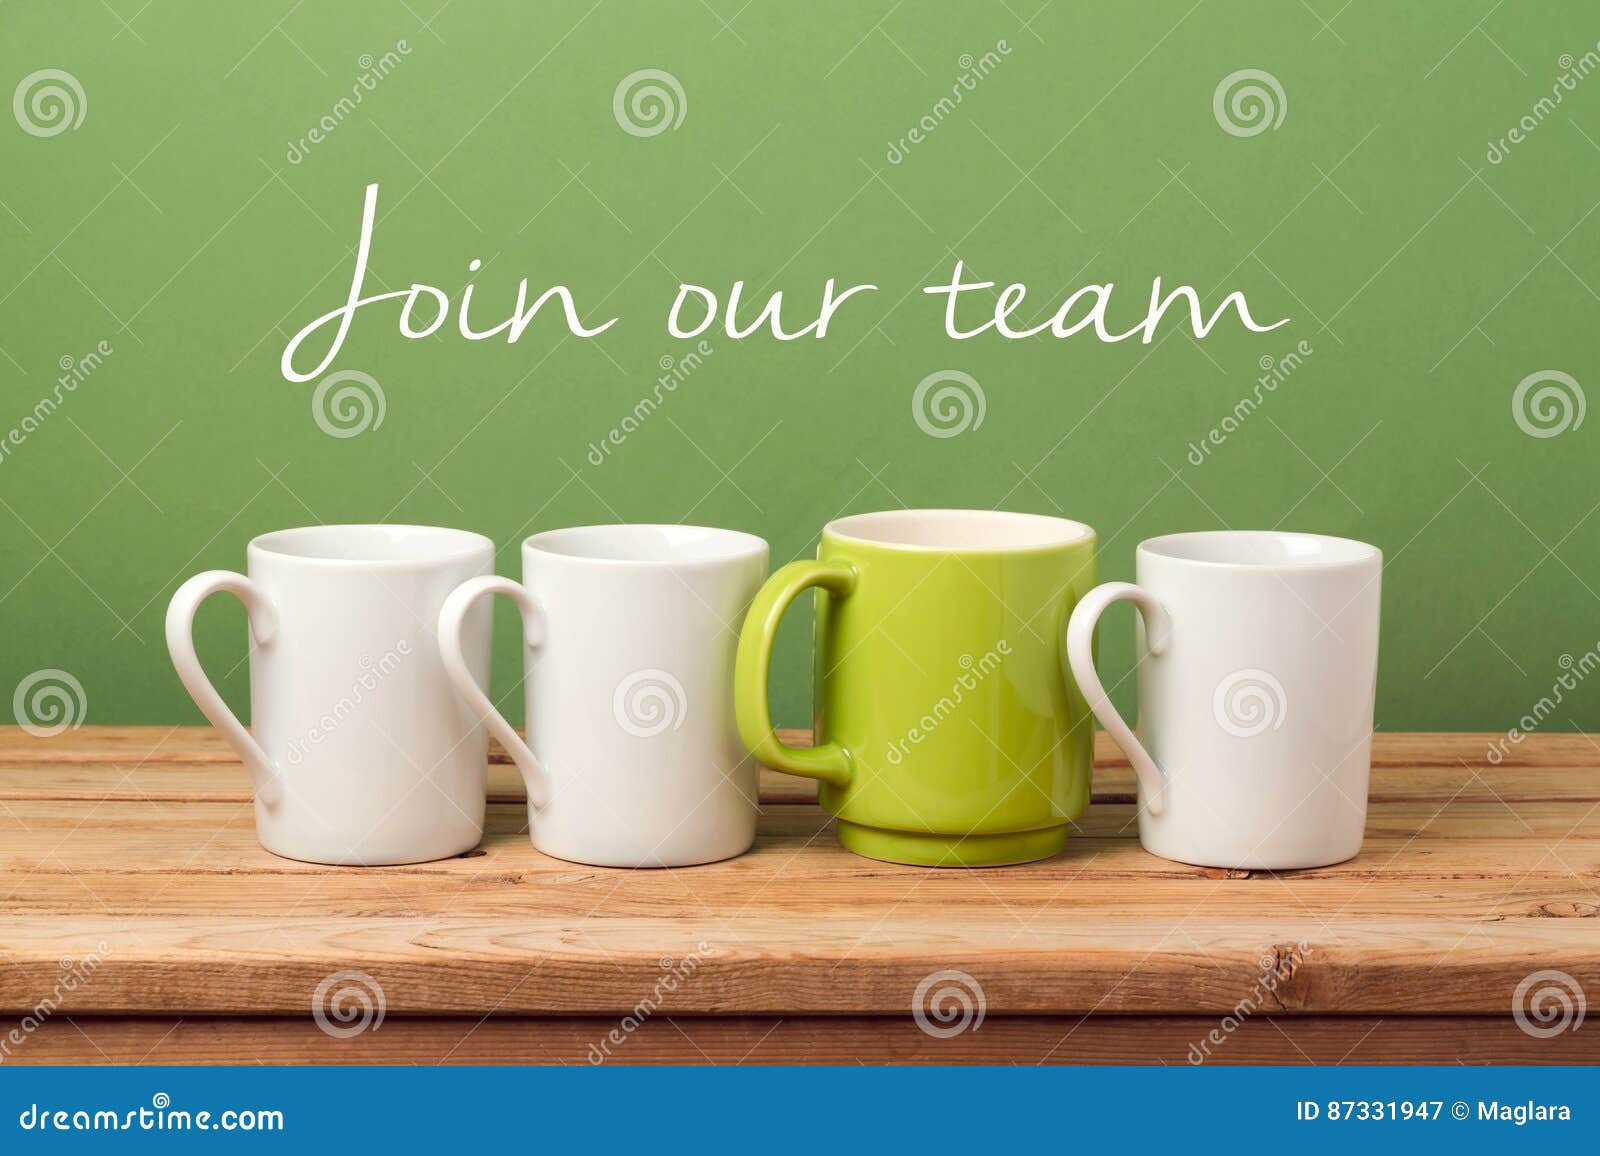 job recruit concept with coffee cups and text `join our team`. business background